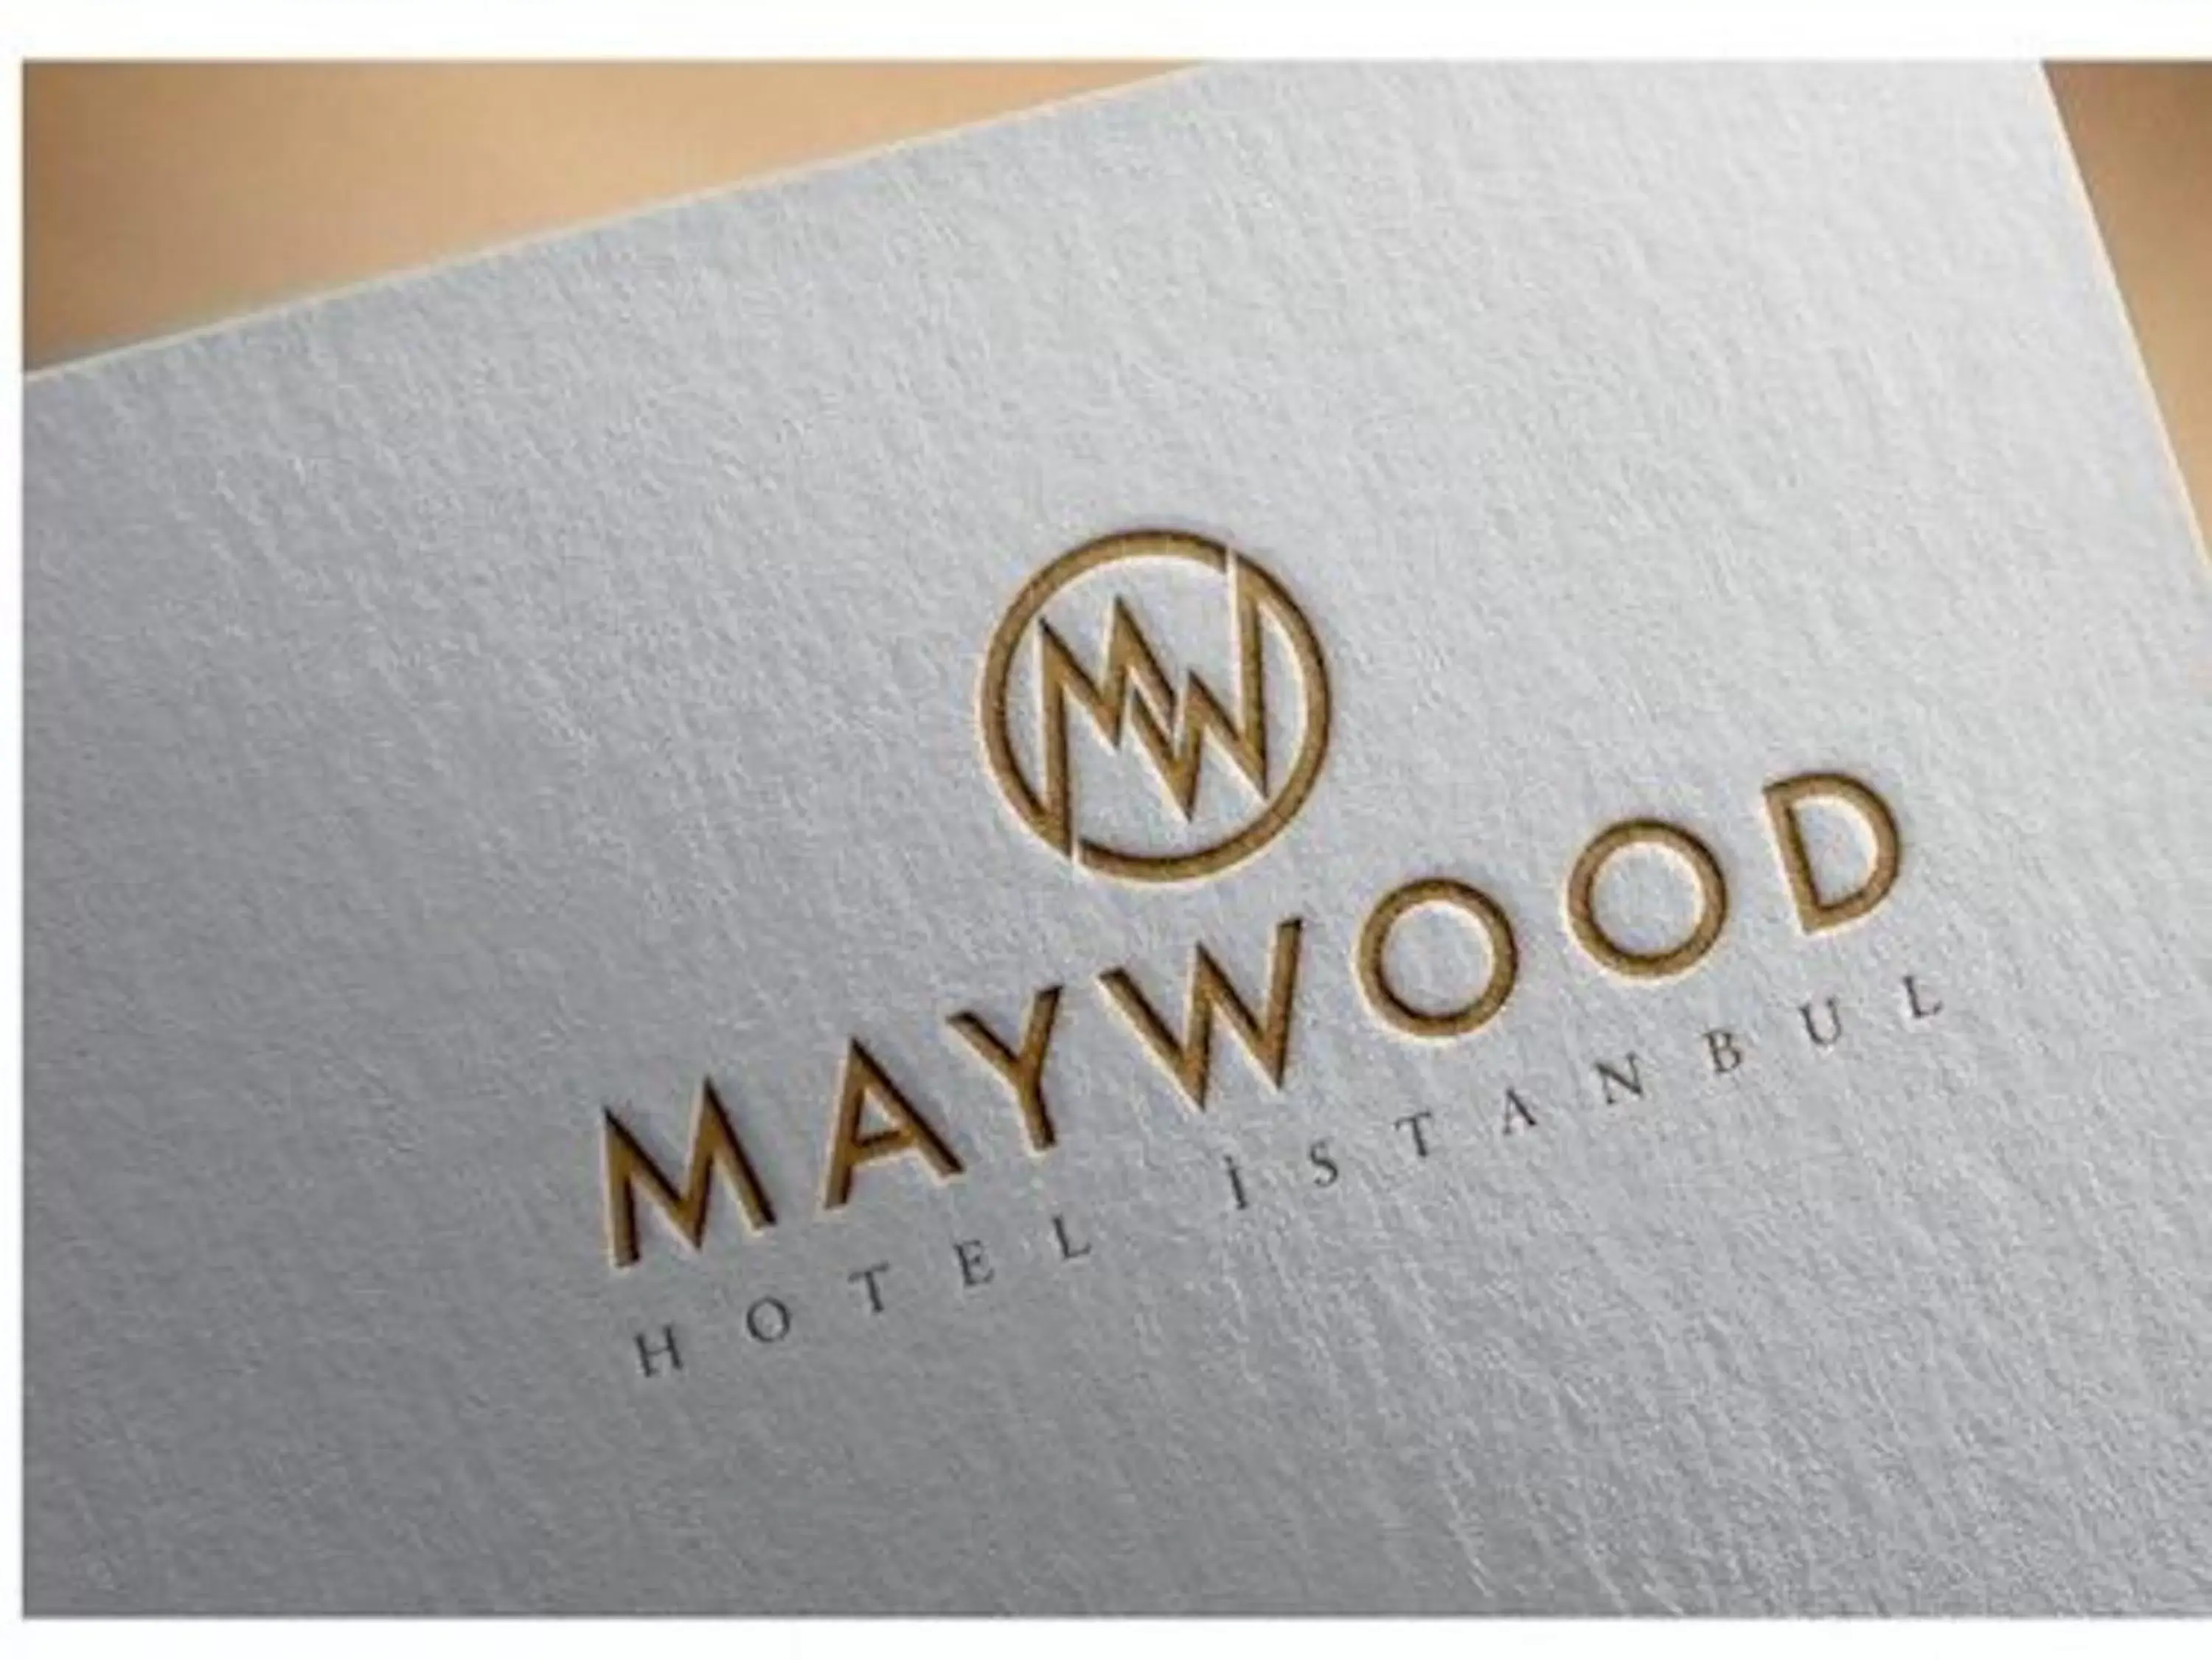 Logo/Certificate/Sign in Maywood Hotel